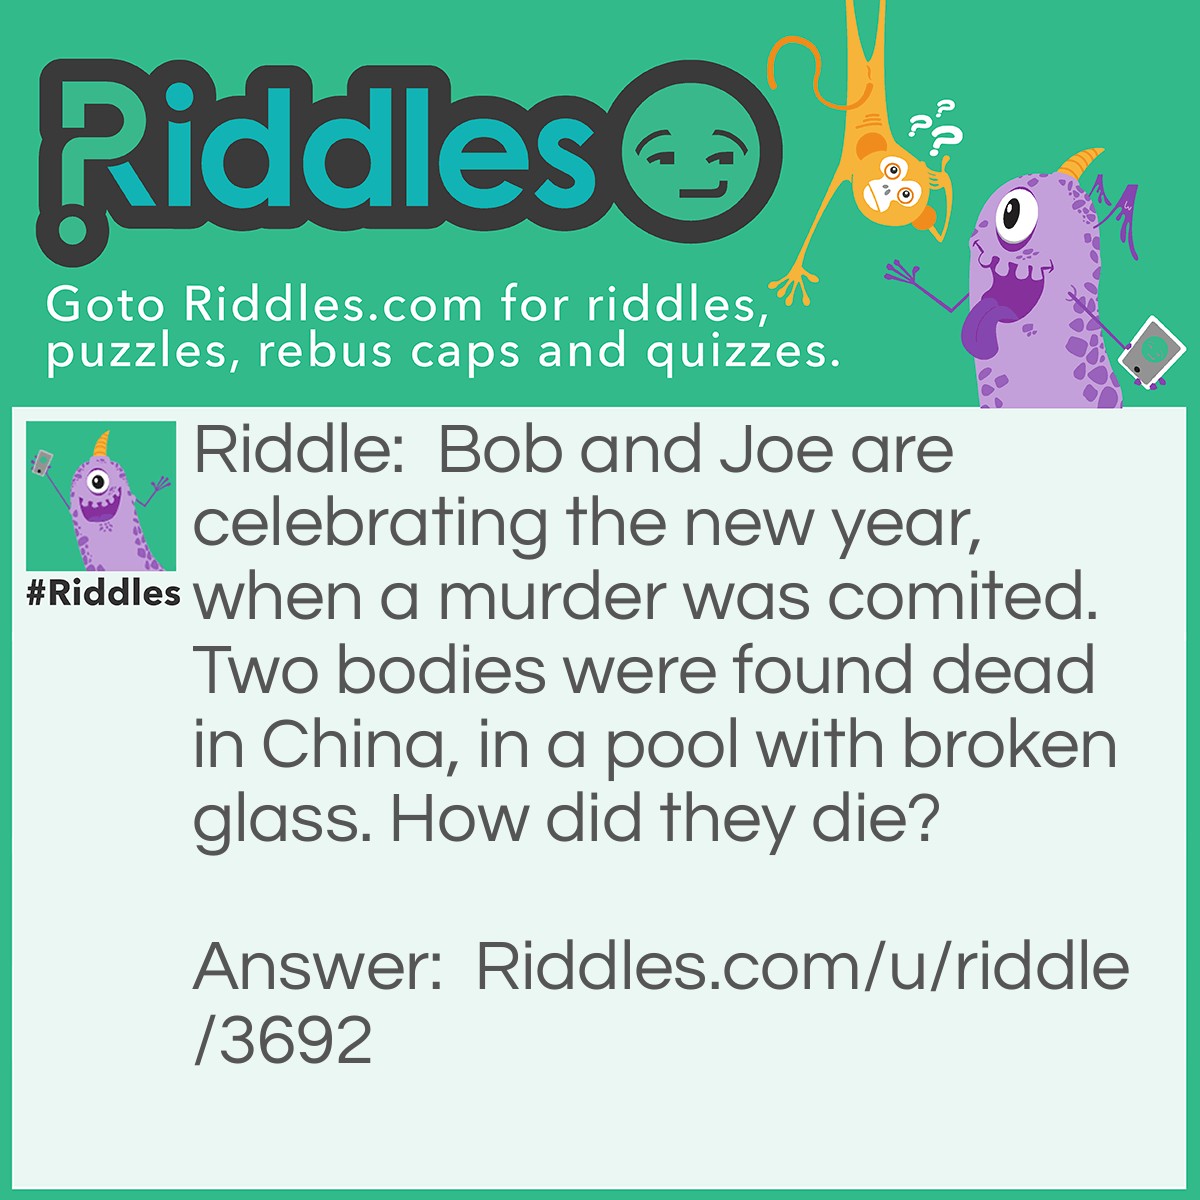 Riddle: Bob and Joe are celebrating the new year, when a murder was comited. Two bodies were found dead in China, in a pool with broken glass. How did they die? Answer: The bodies of goldfish.